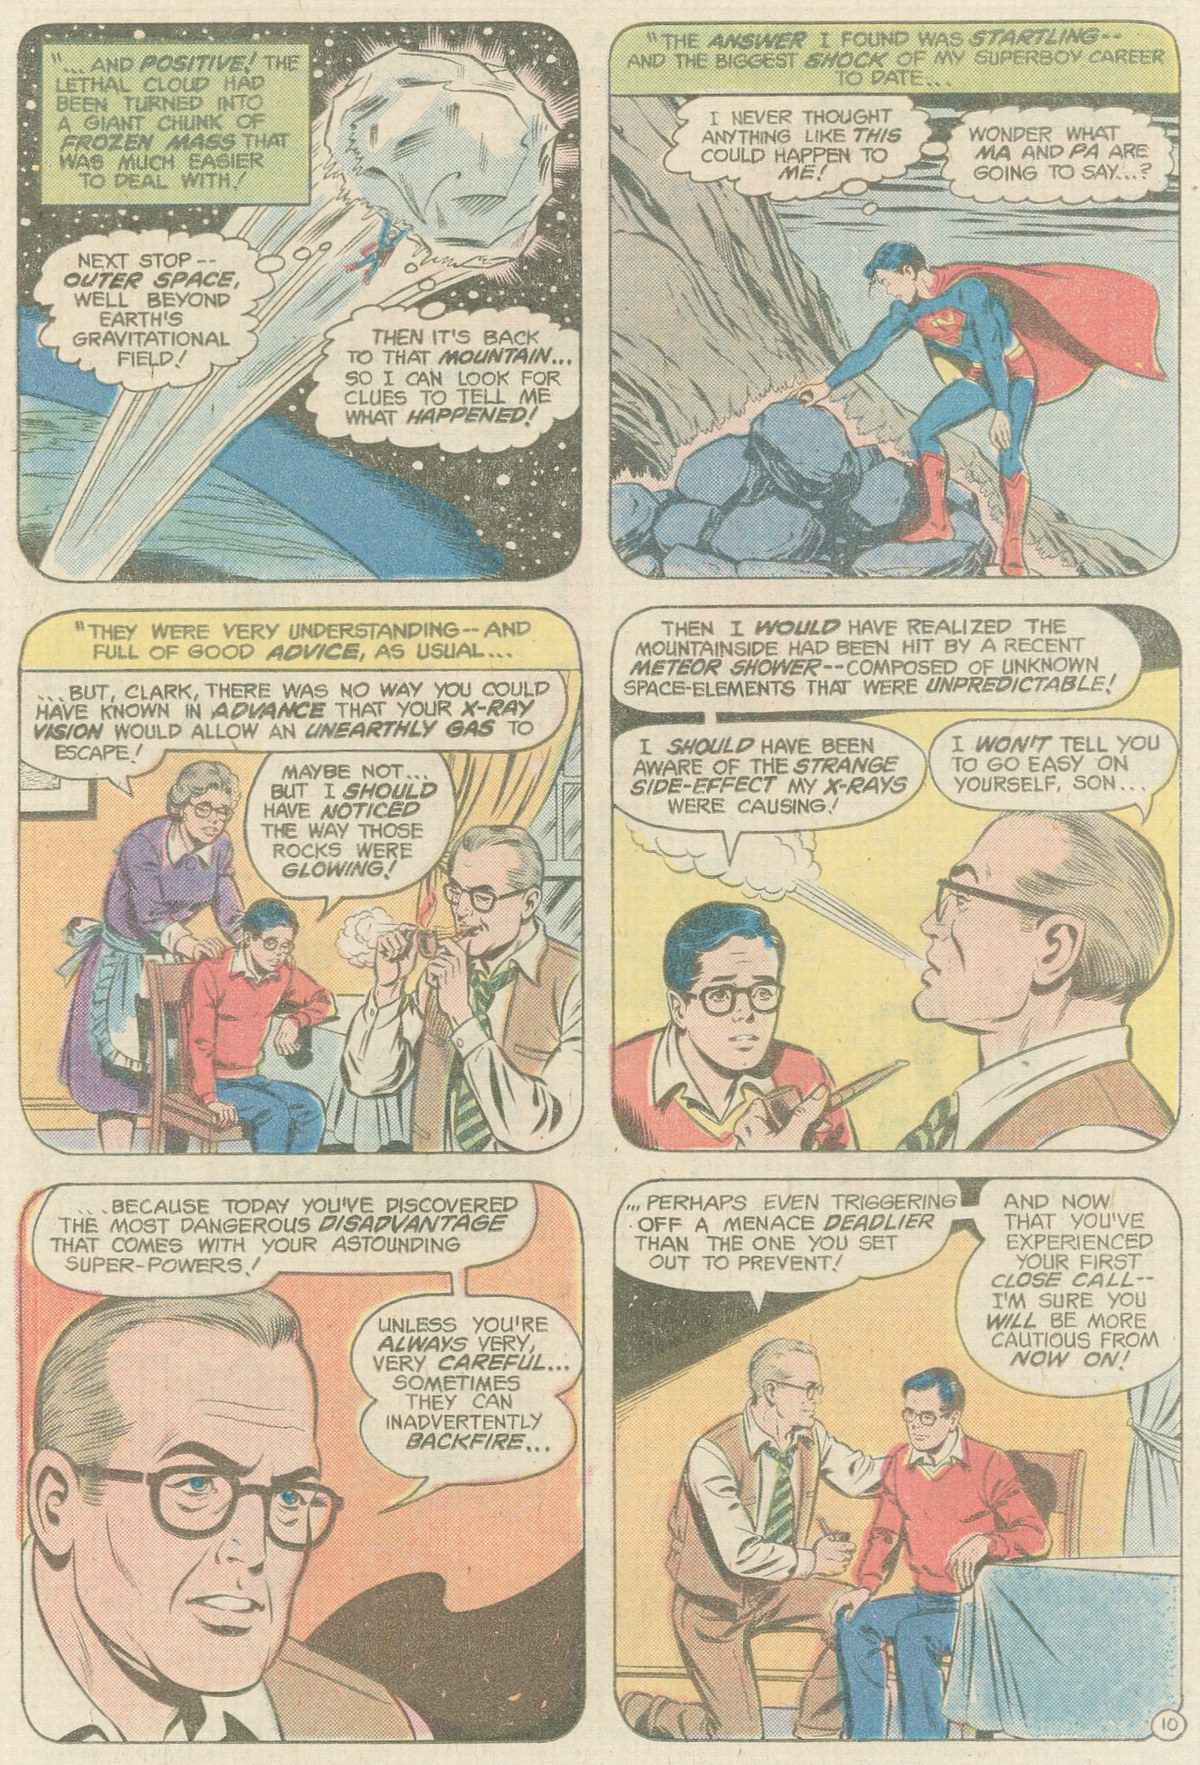 The New Adventures of Superboy 22 Page 10